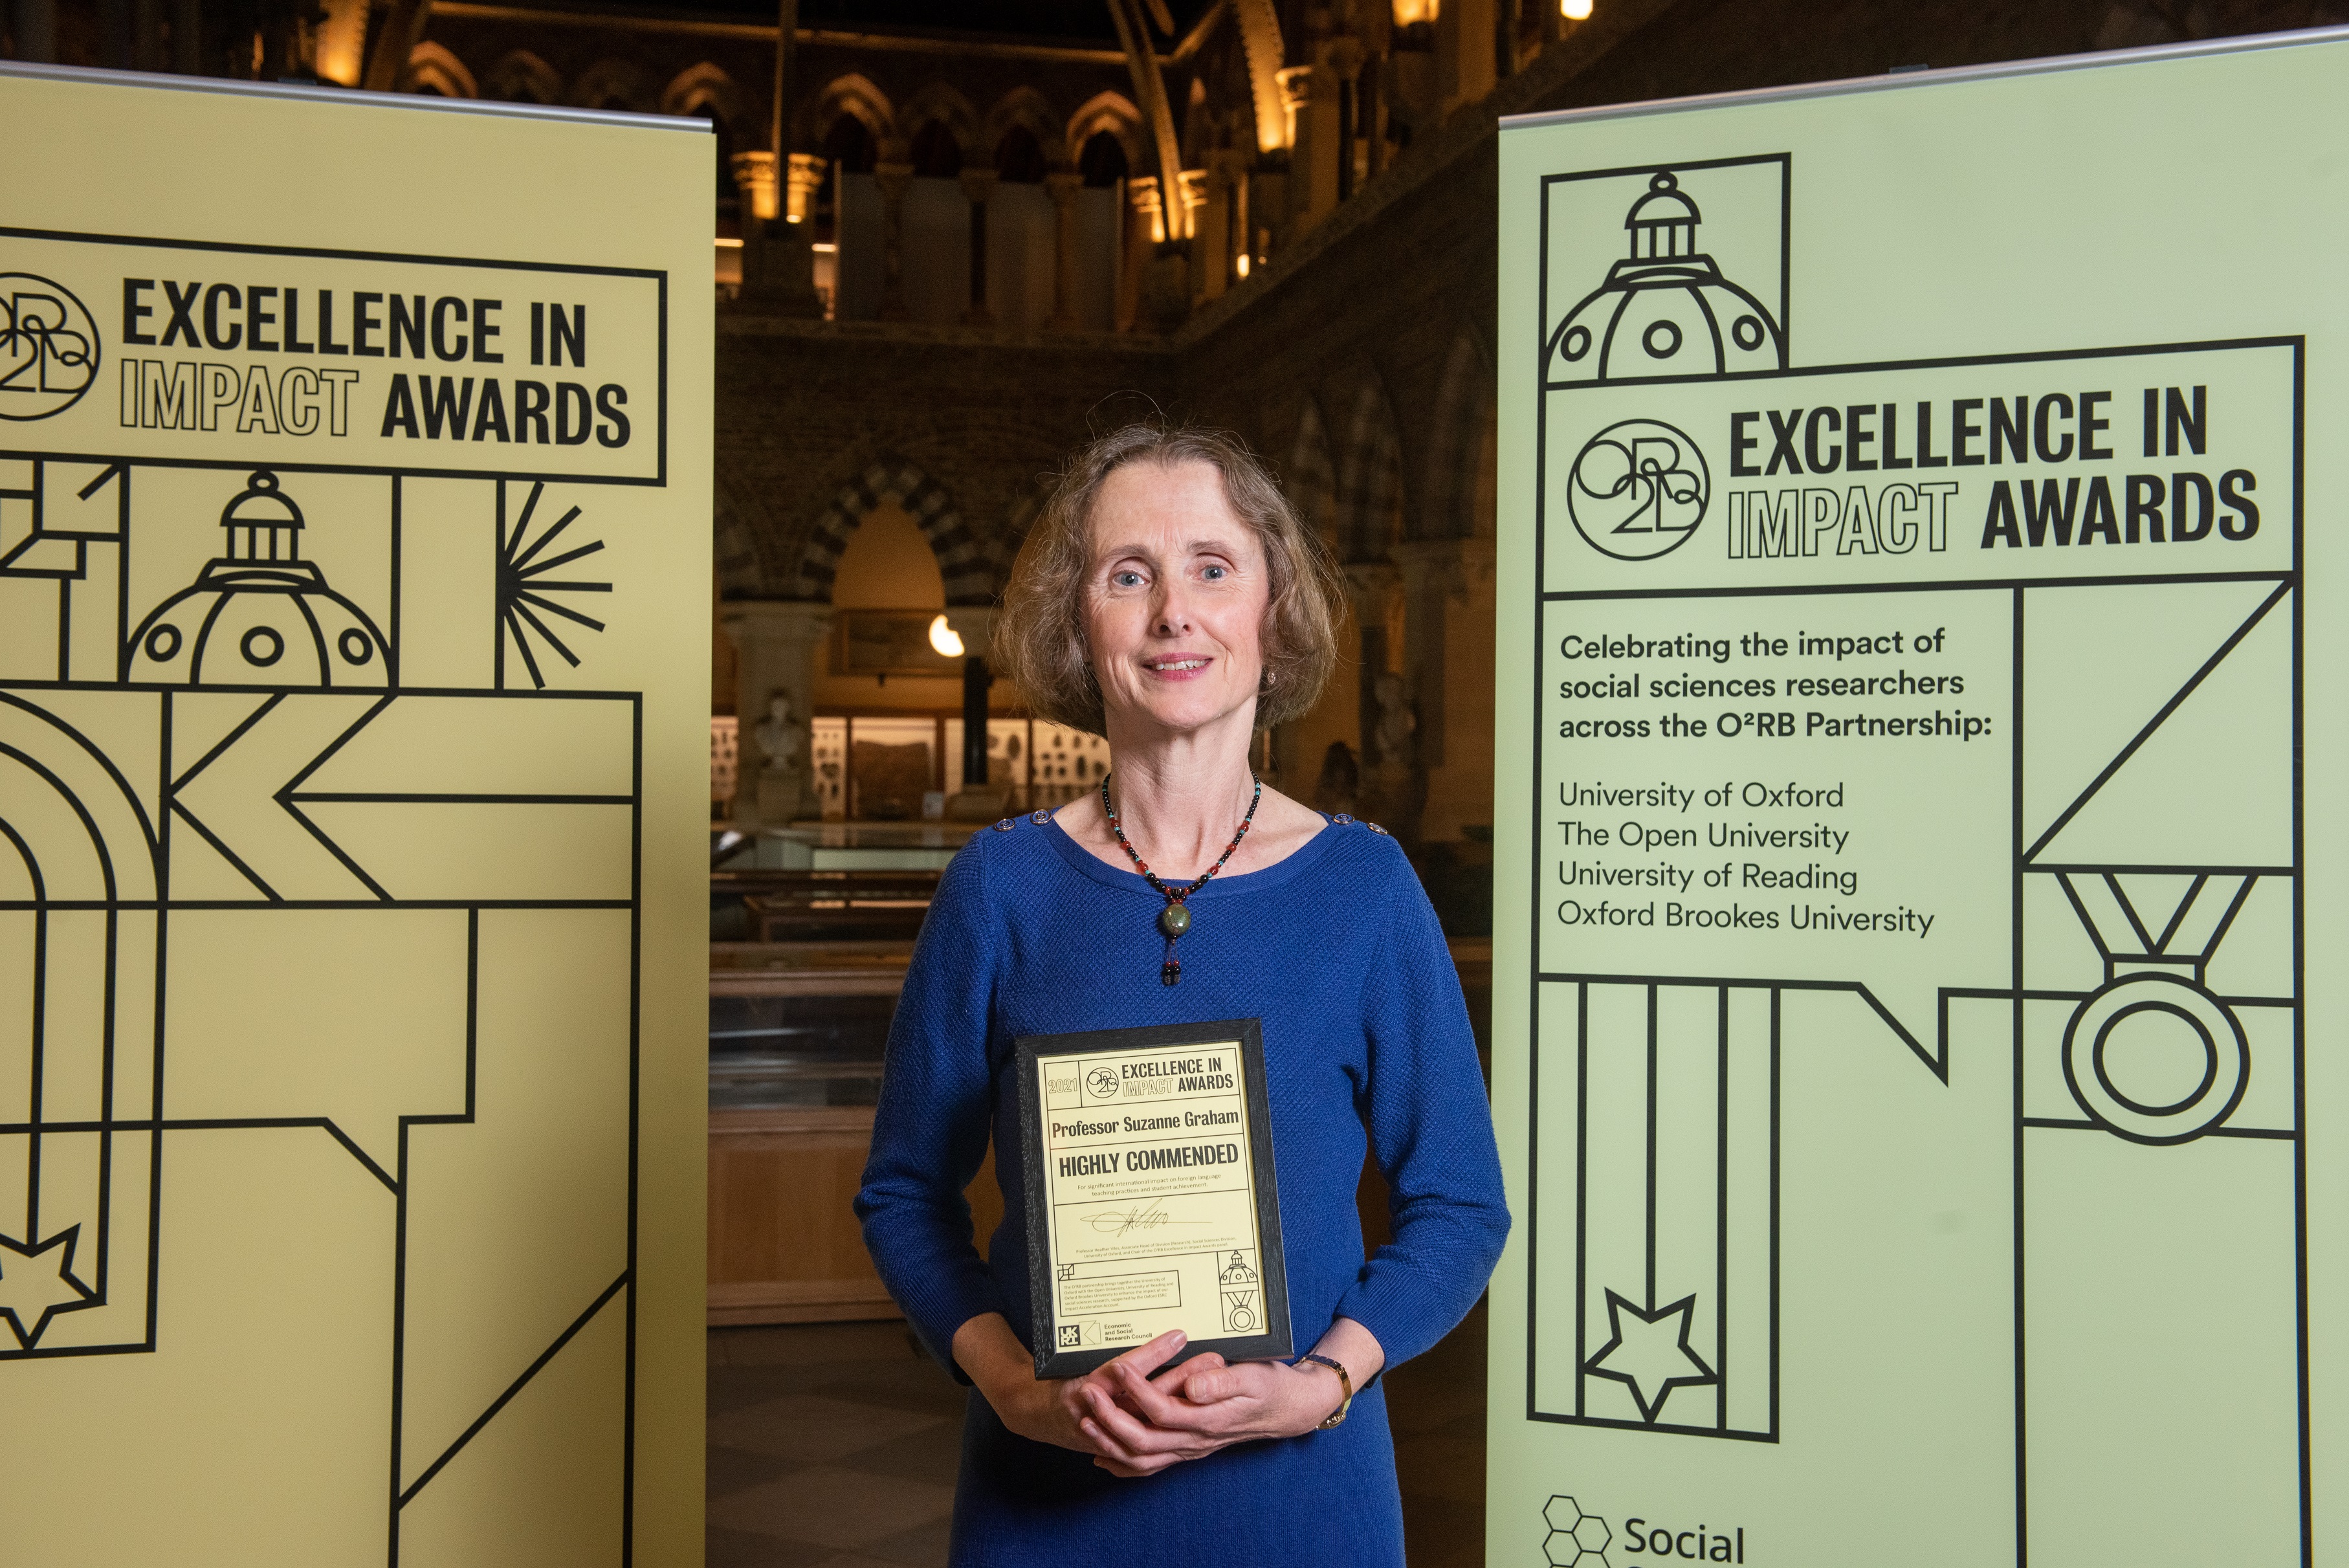 Professor Suzanne Graham holds the Highly Commended impact award, flanked by event branding at the awards reception